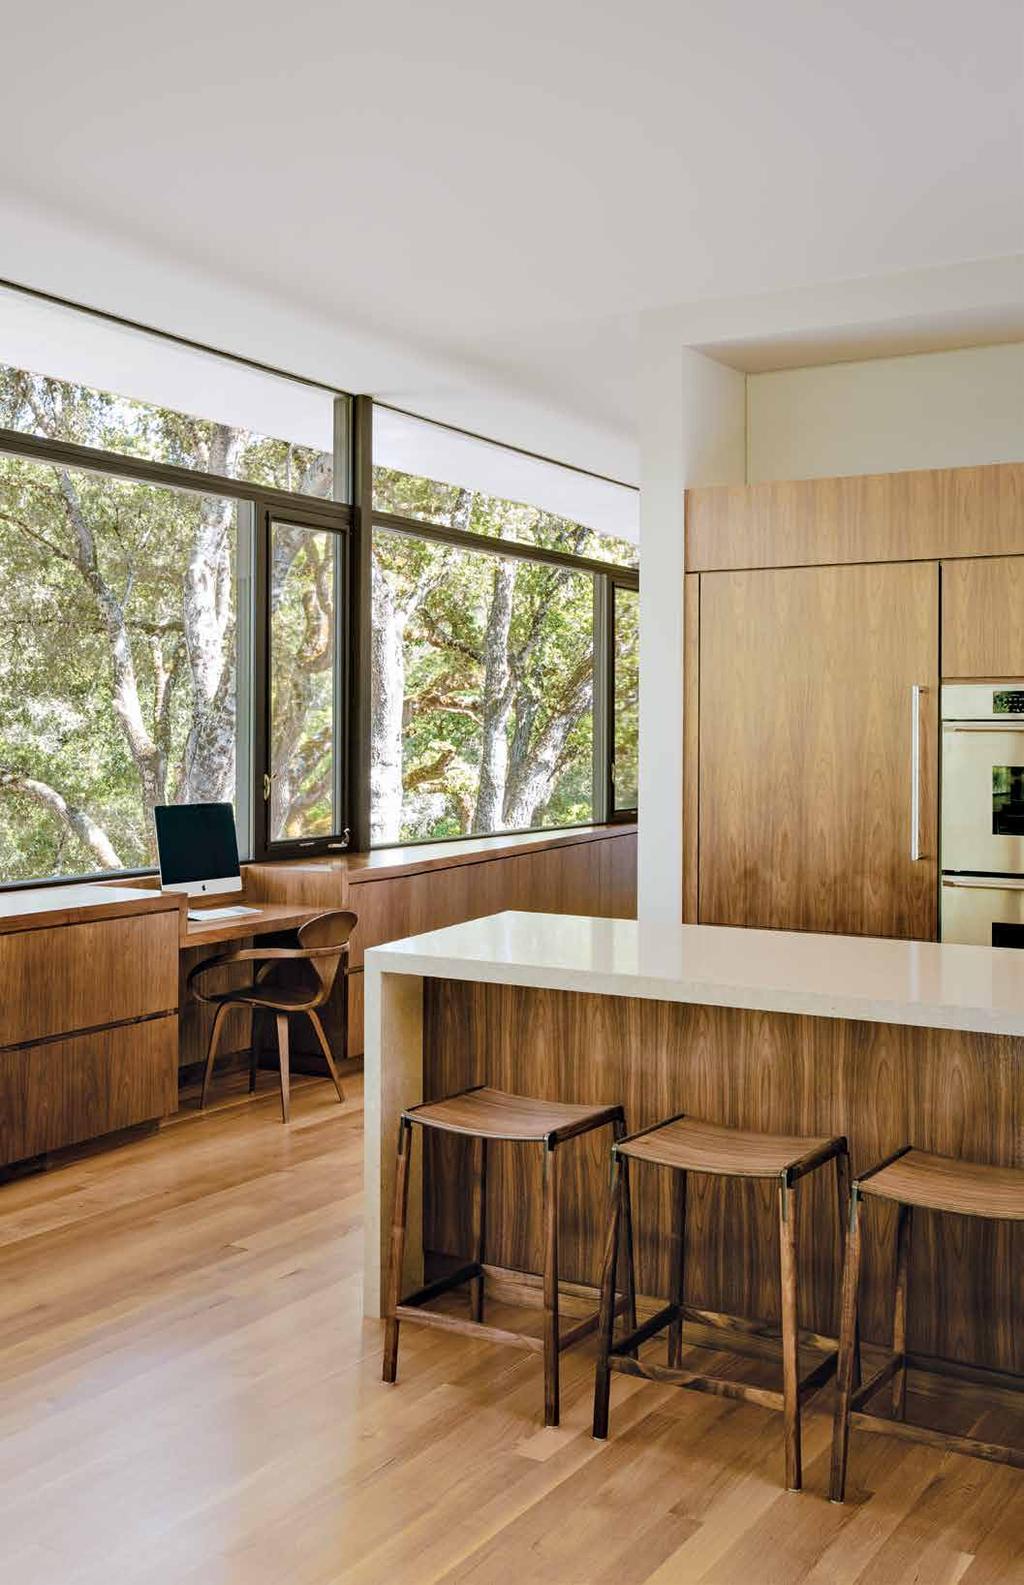 A set of custom walnut-andaluminum barstools by Fyrn complements the custom kitchen cabinetry designed by Sagan Piechota Architecture and